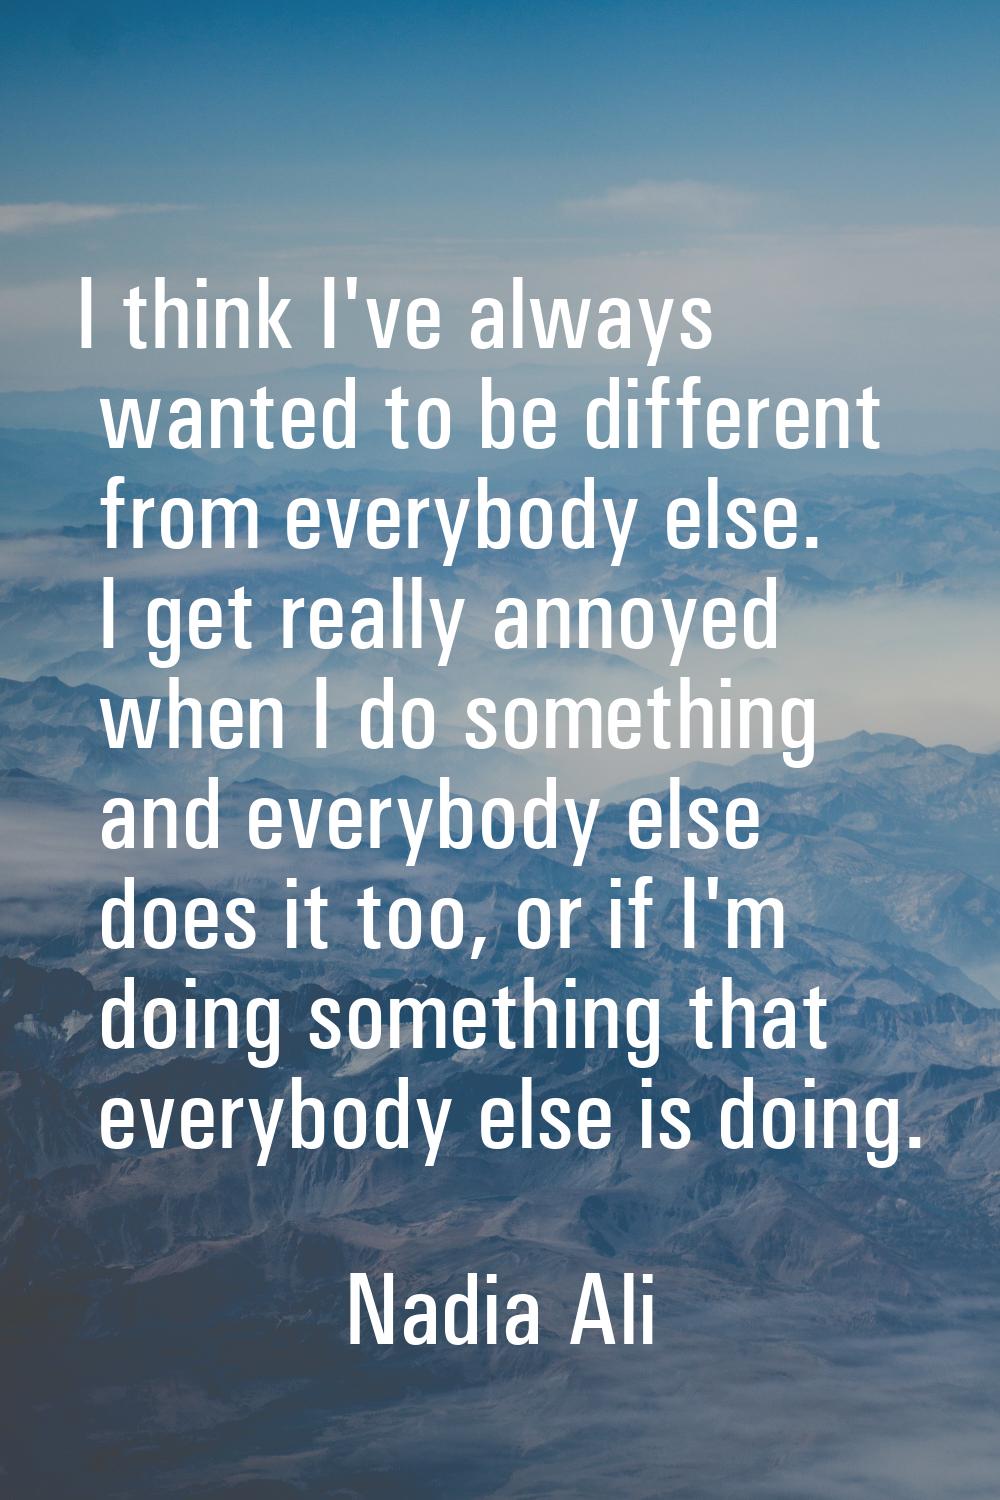 I think I've always wanted to be different from everybody else. I get really annoyed when I do some